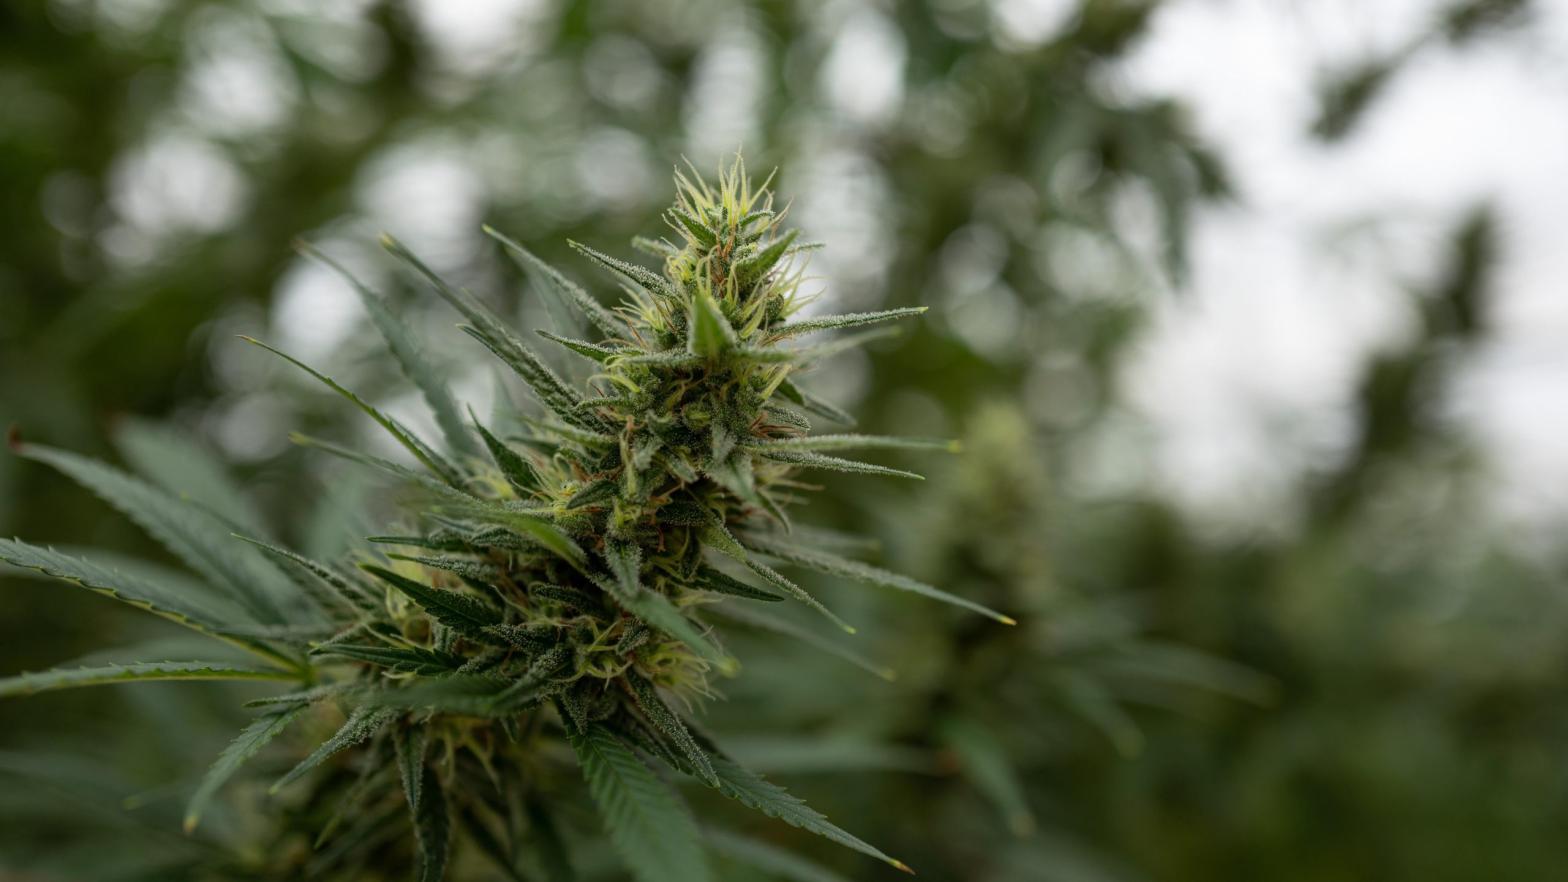 A cannabis flower in Uganda in 2020. (Image: Luke Dray/Getty Images, Getty Images)